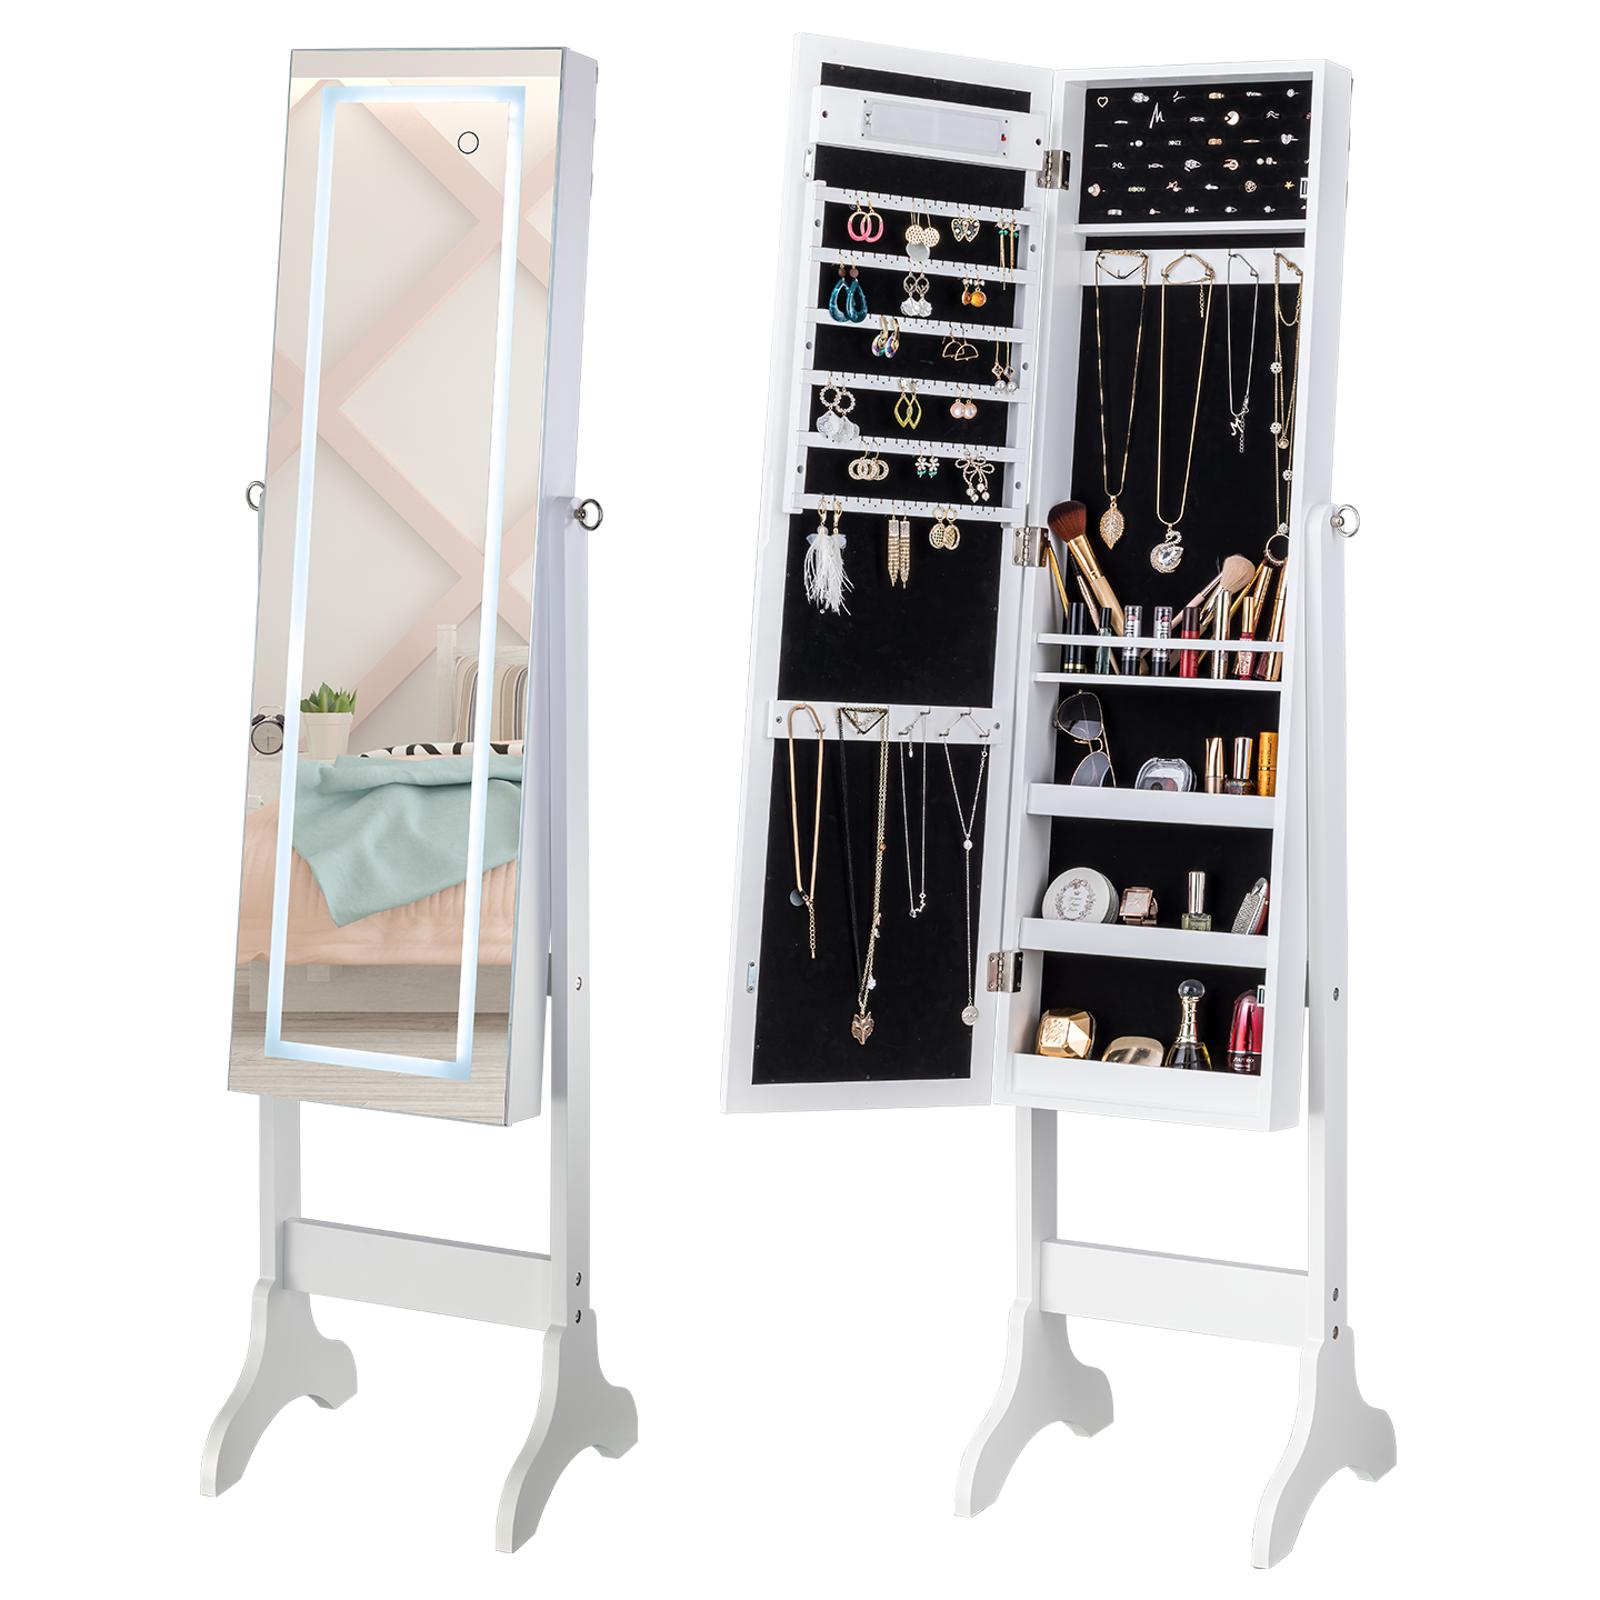 ViscoLogic Emily Touch Operated LED Jewelry Armoire Makeup Mirror Storage Cabinet for Cosmetics, Jewelry, Lockable Cabinet and Organizer With Full Length Mirror (White)